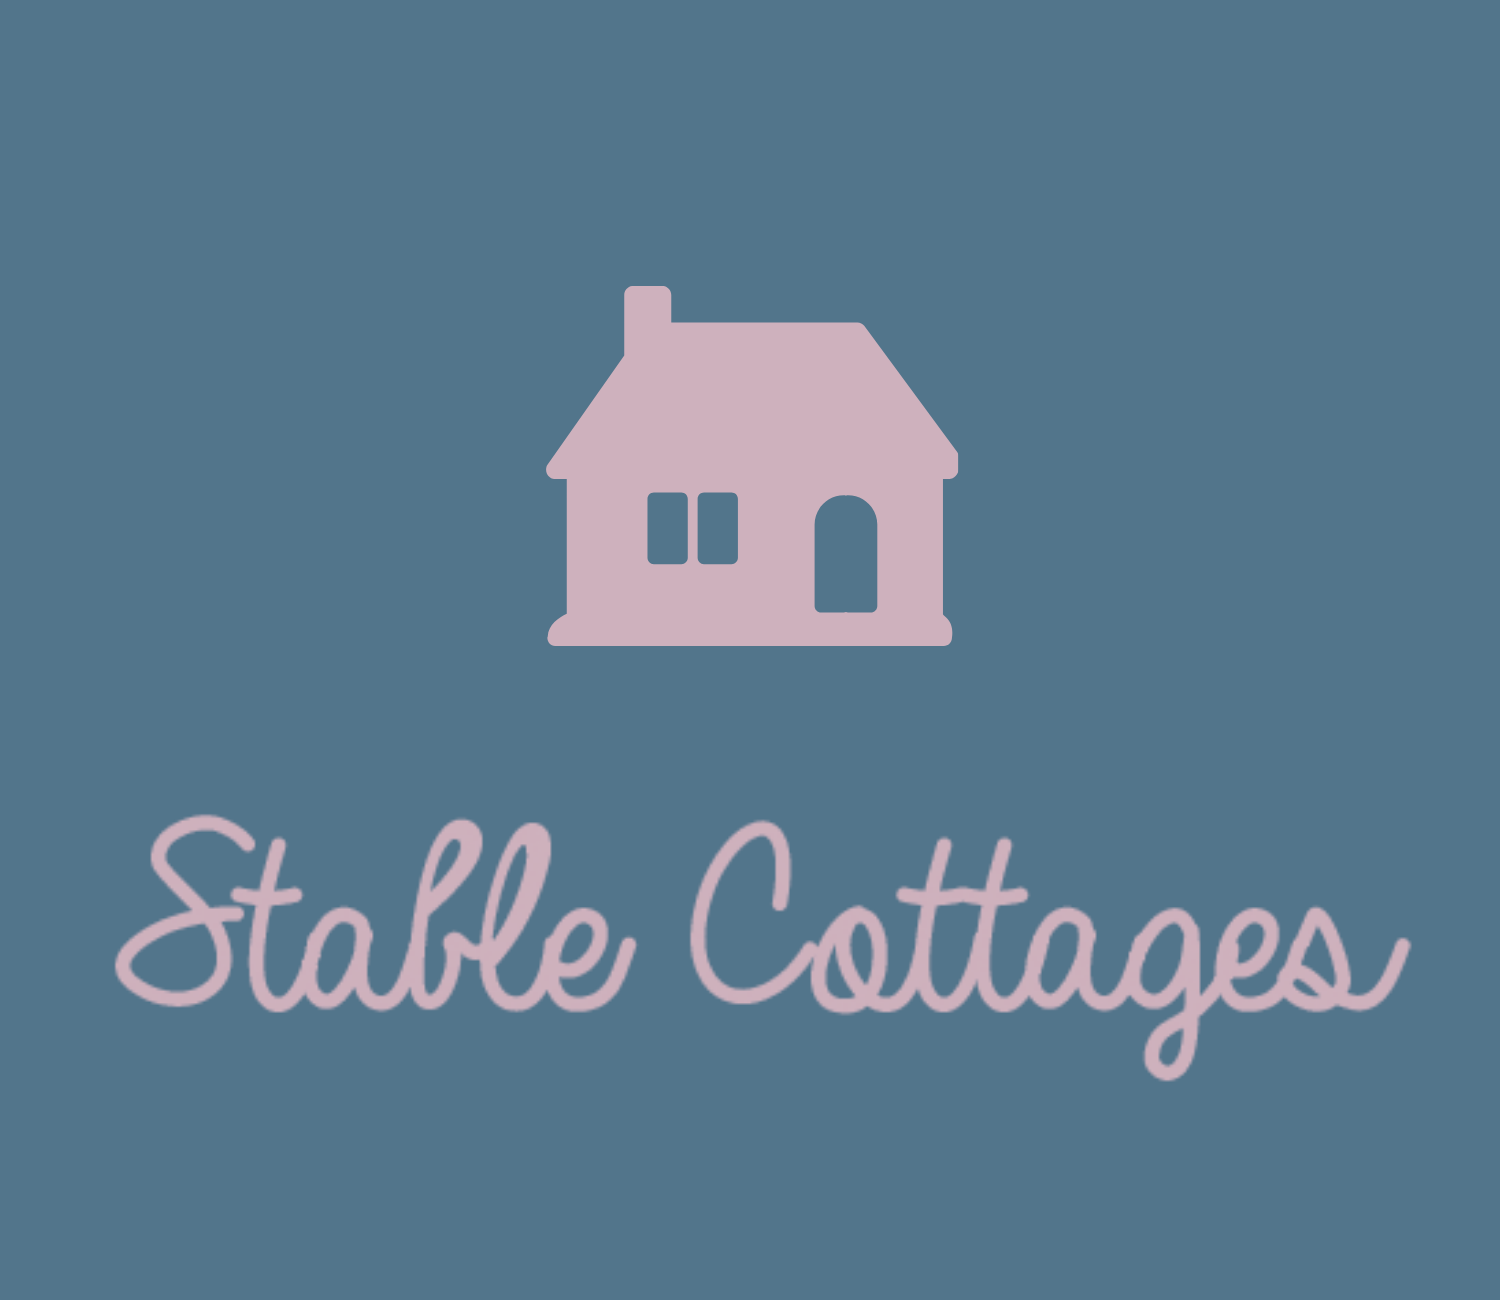 STABLE COTTAGES